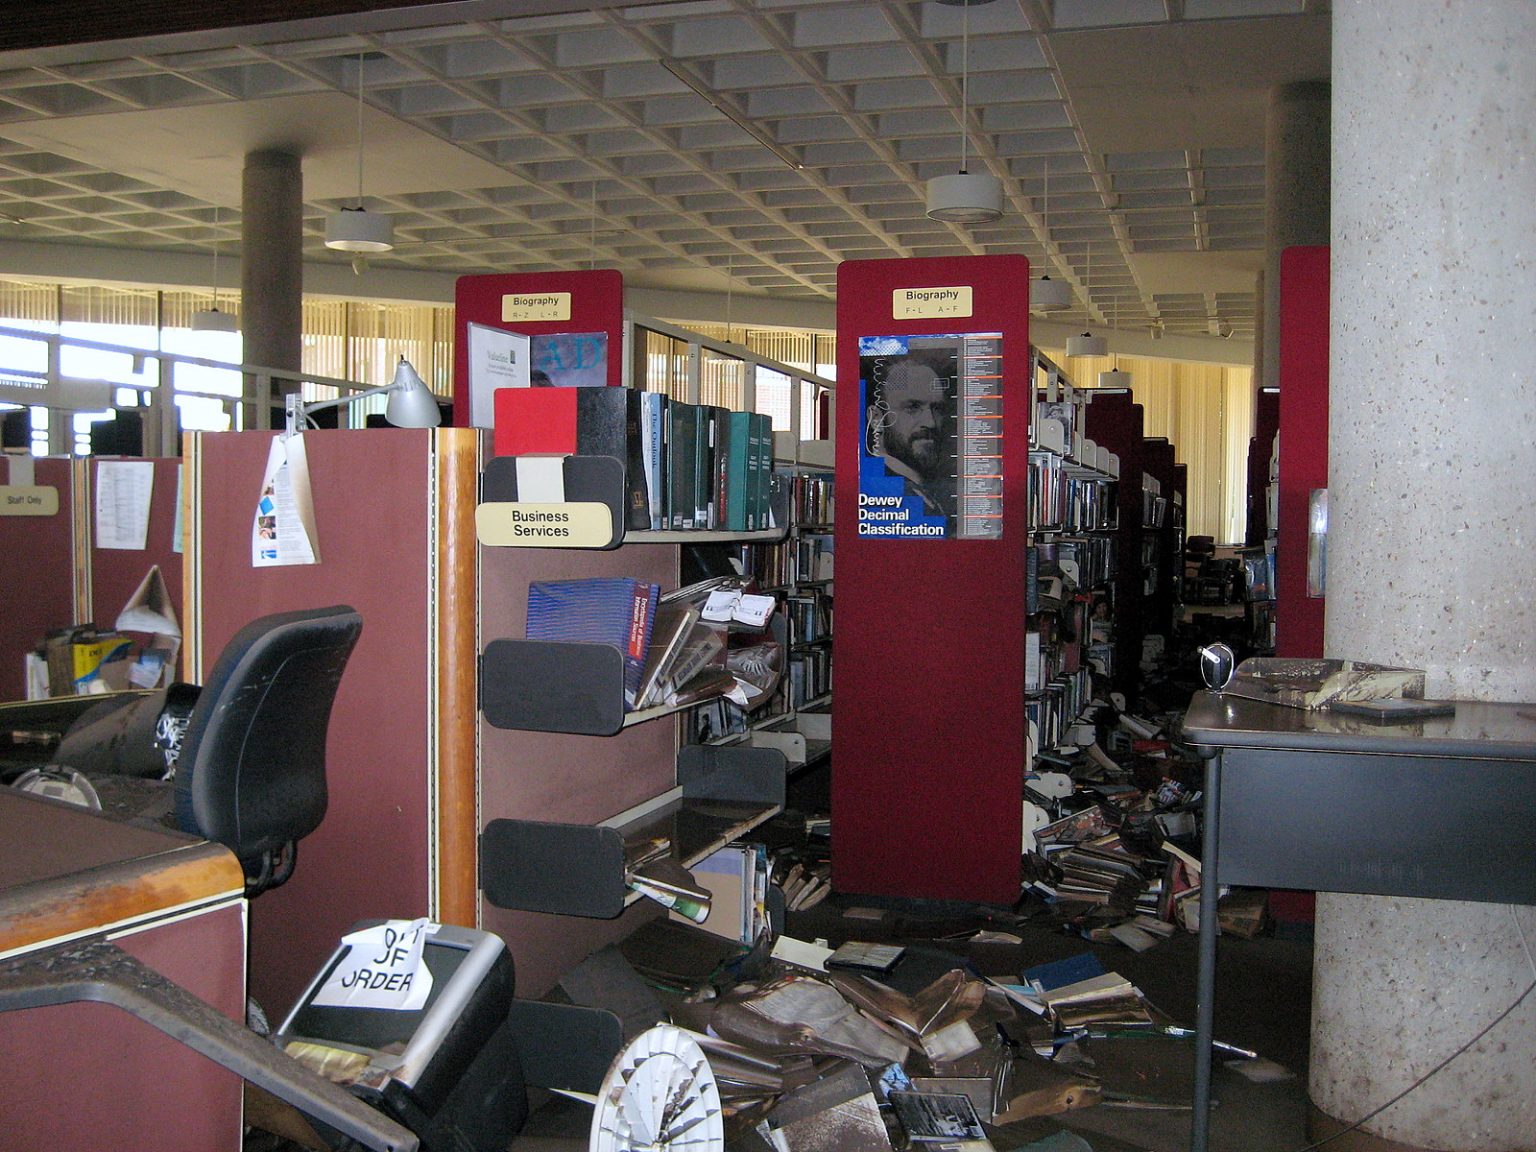 Books fall off shelves and cover the floor.